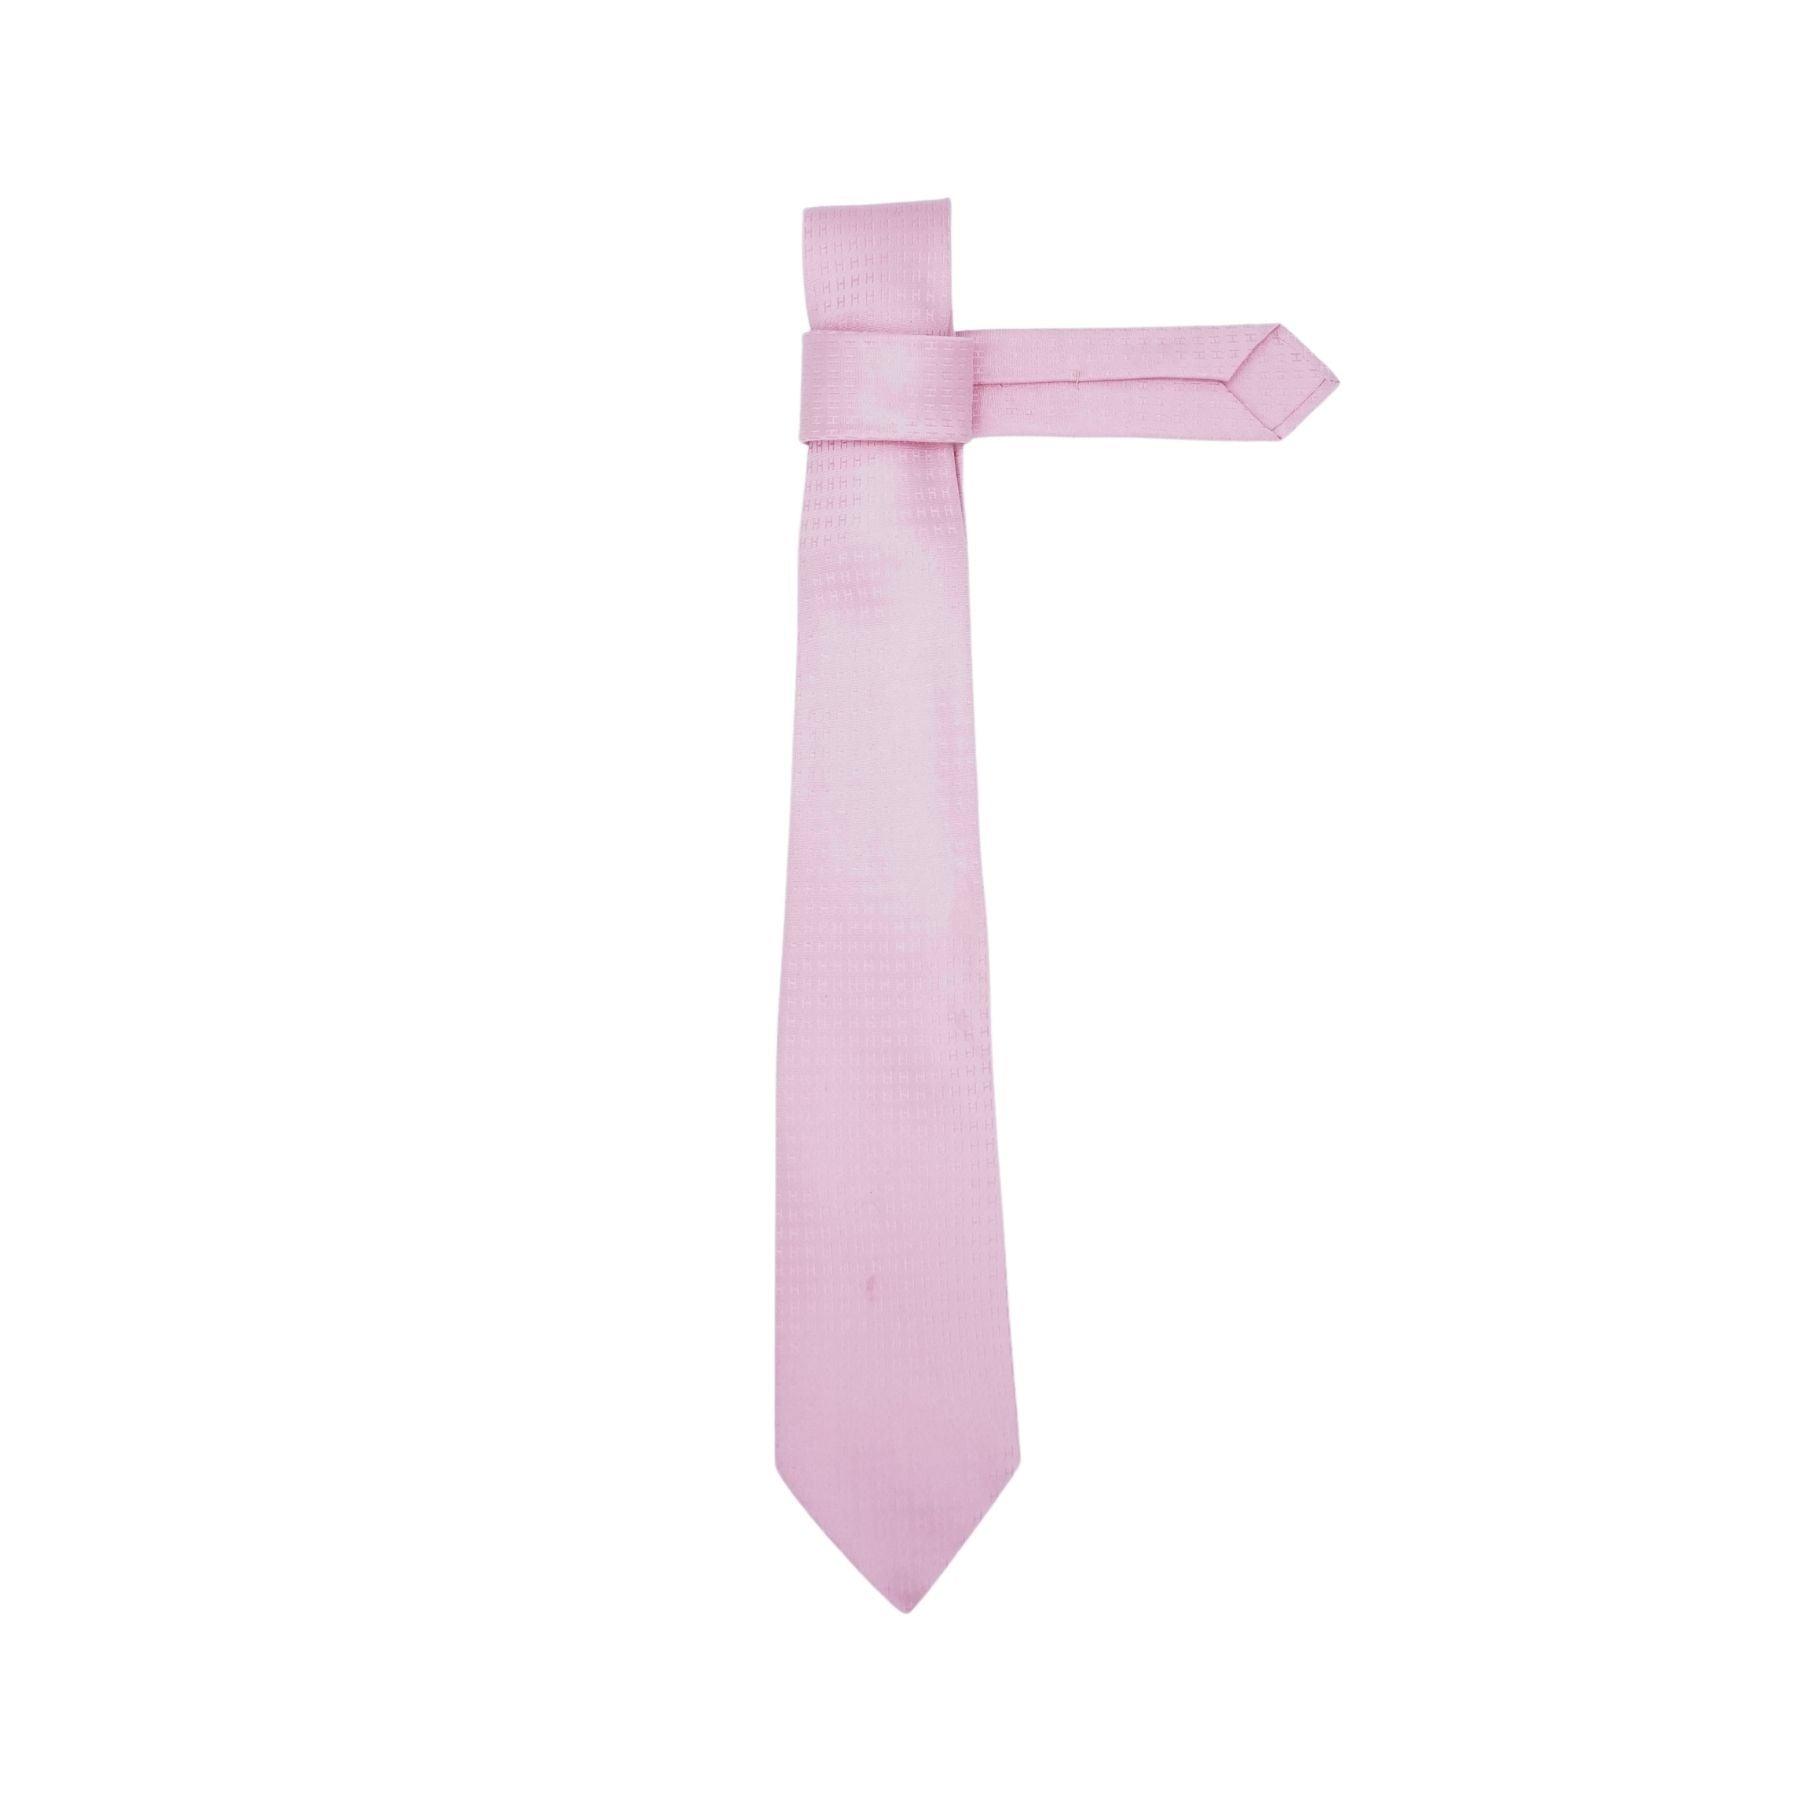 Hermes Tie - Fashionably Yours